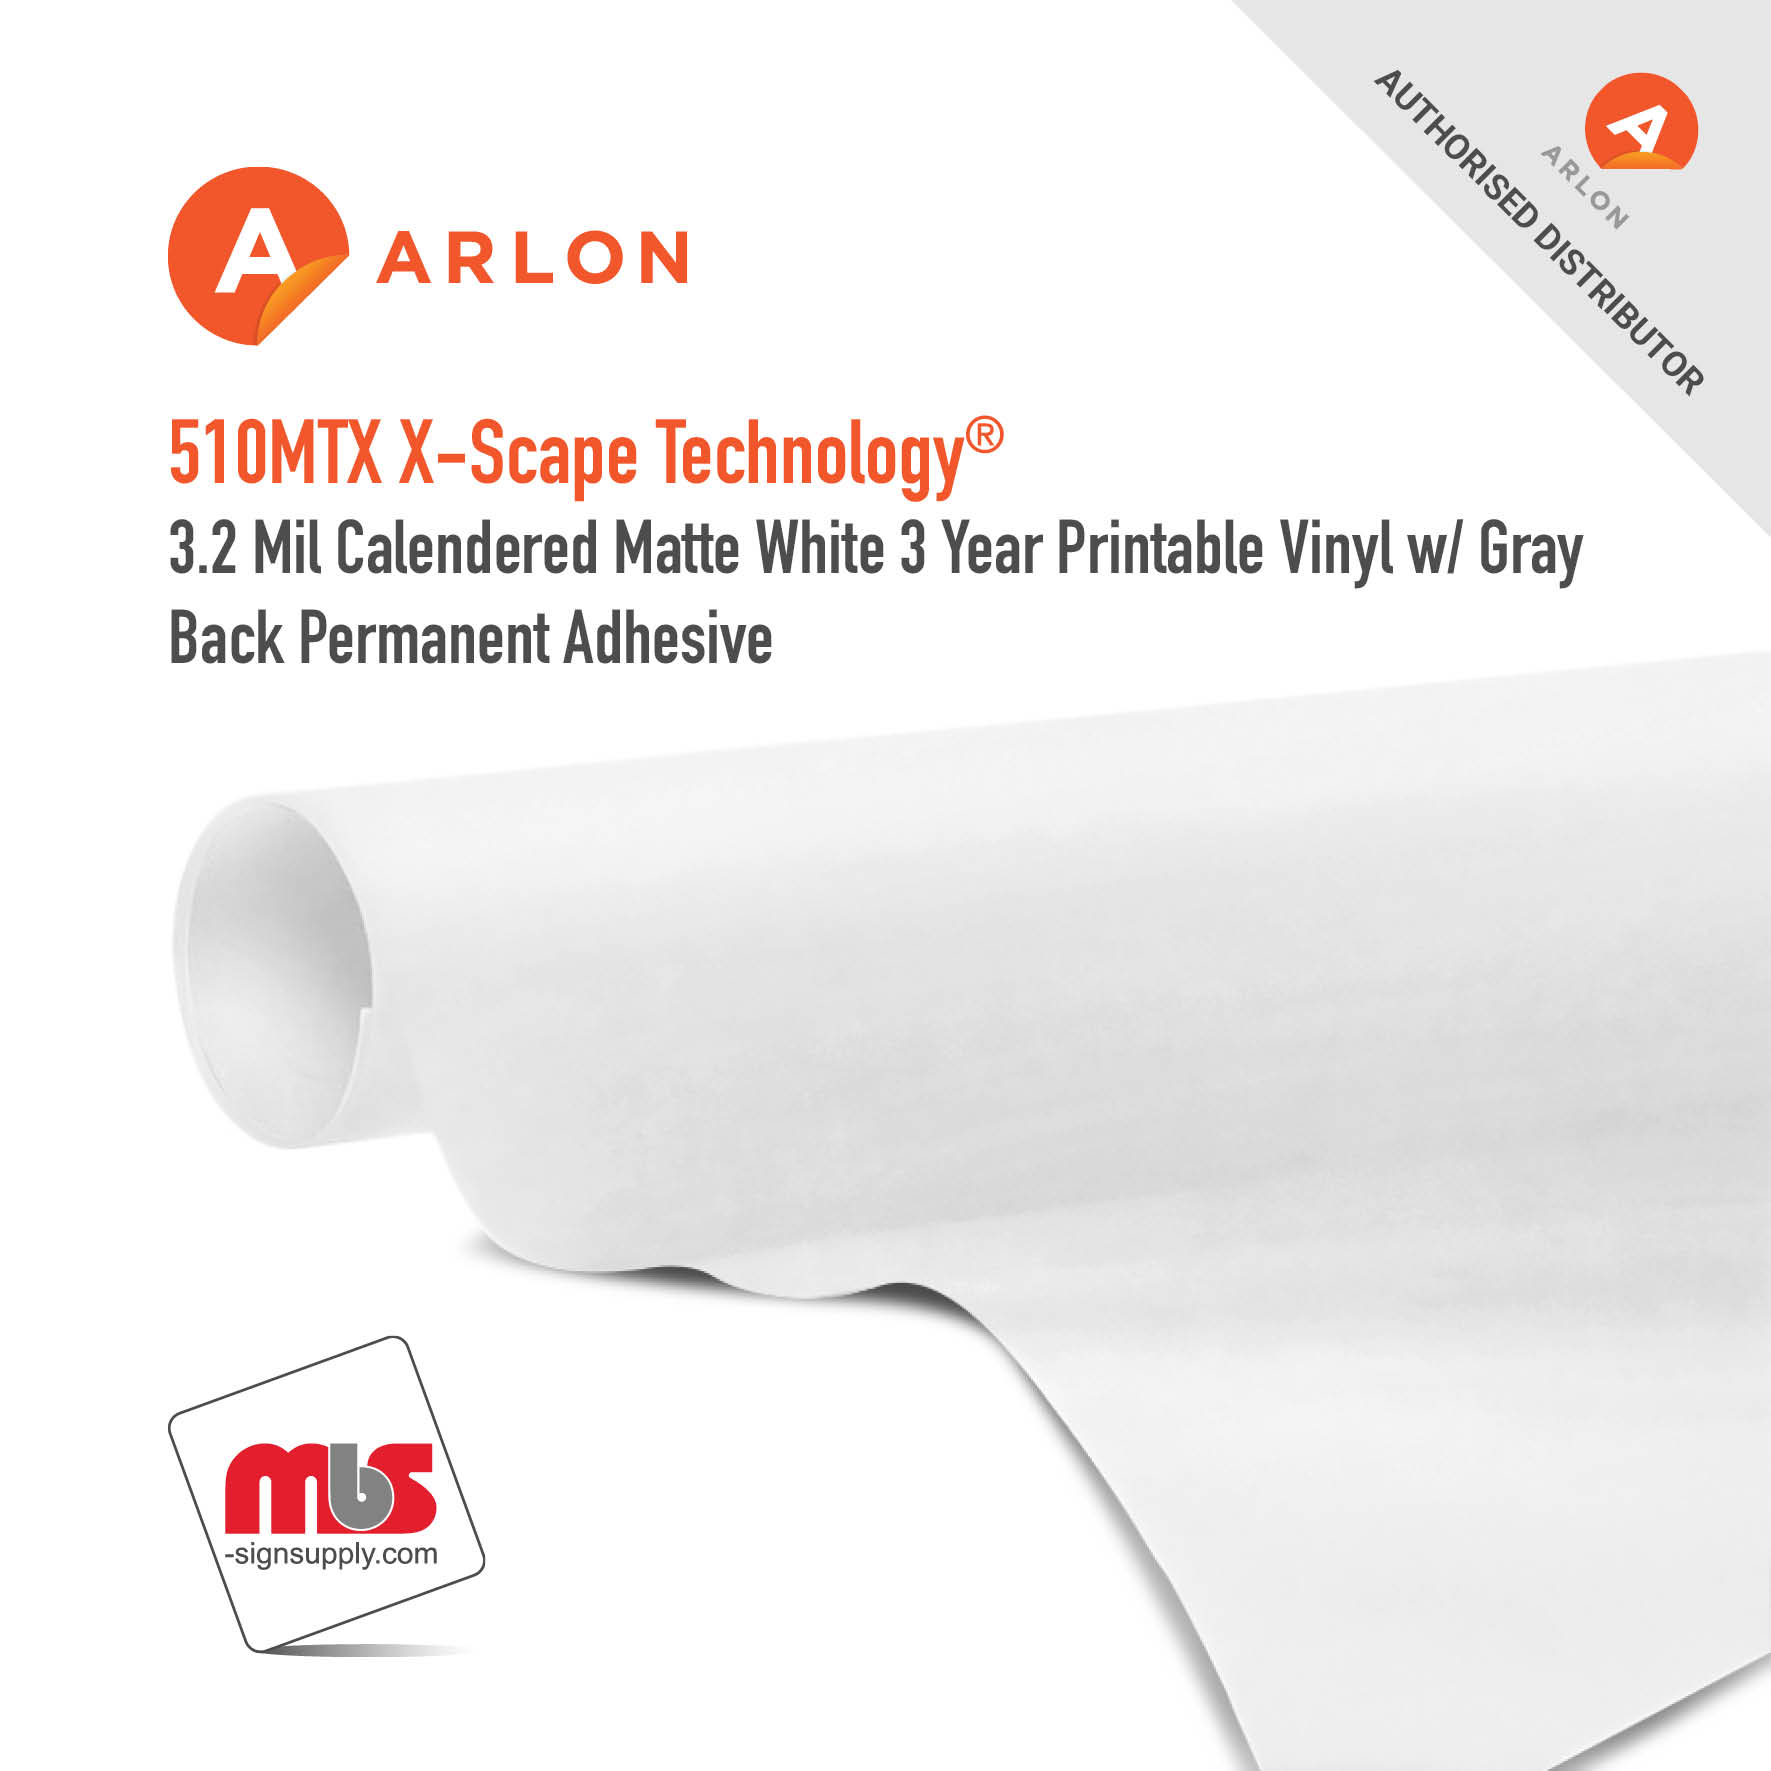 54'' x 50 Yard Roll - Arlon DPF 510MTX X-Scape Technology® 3.2 Mil Calendered Matte White 3 Year Printable Vinyl w/ Gray Back Permanent Adhesive